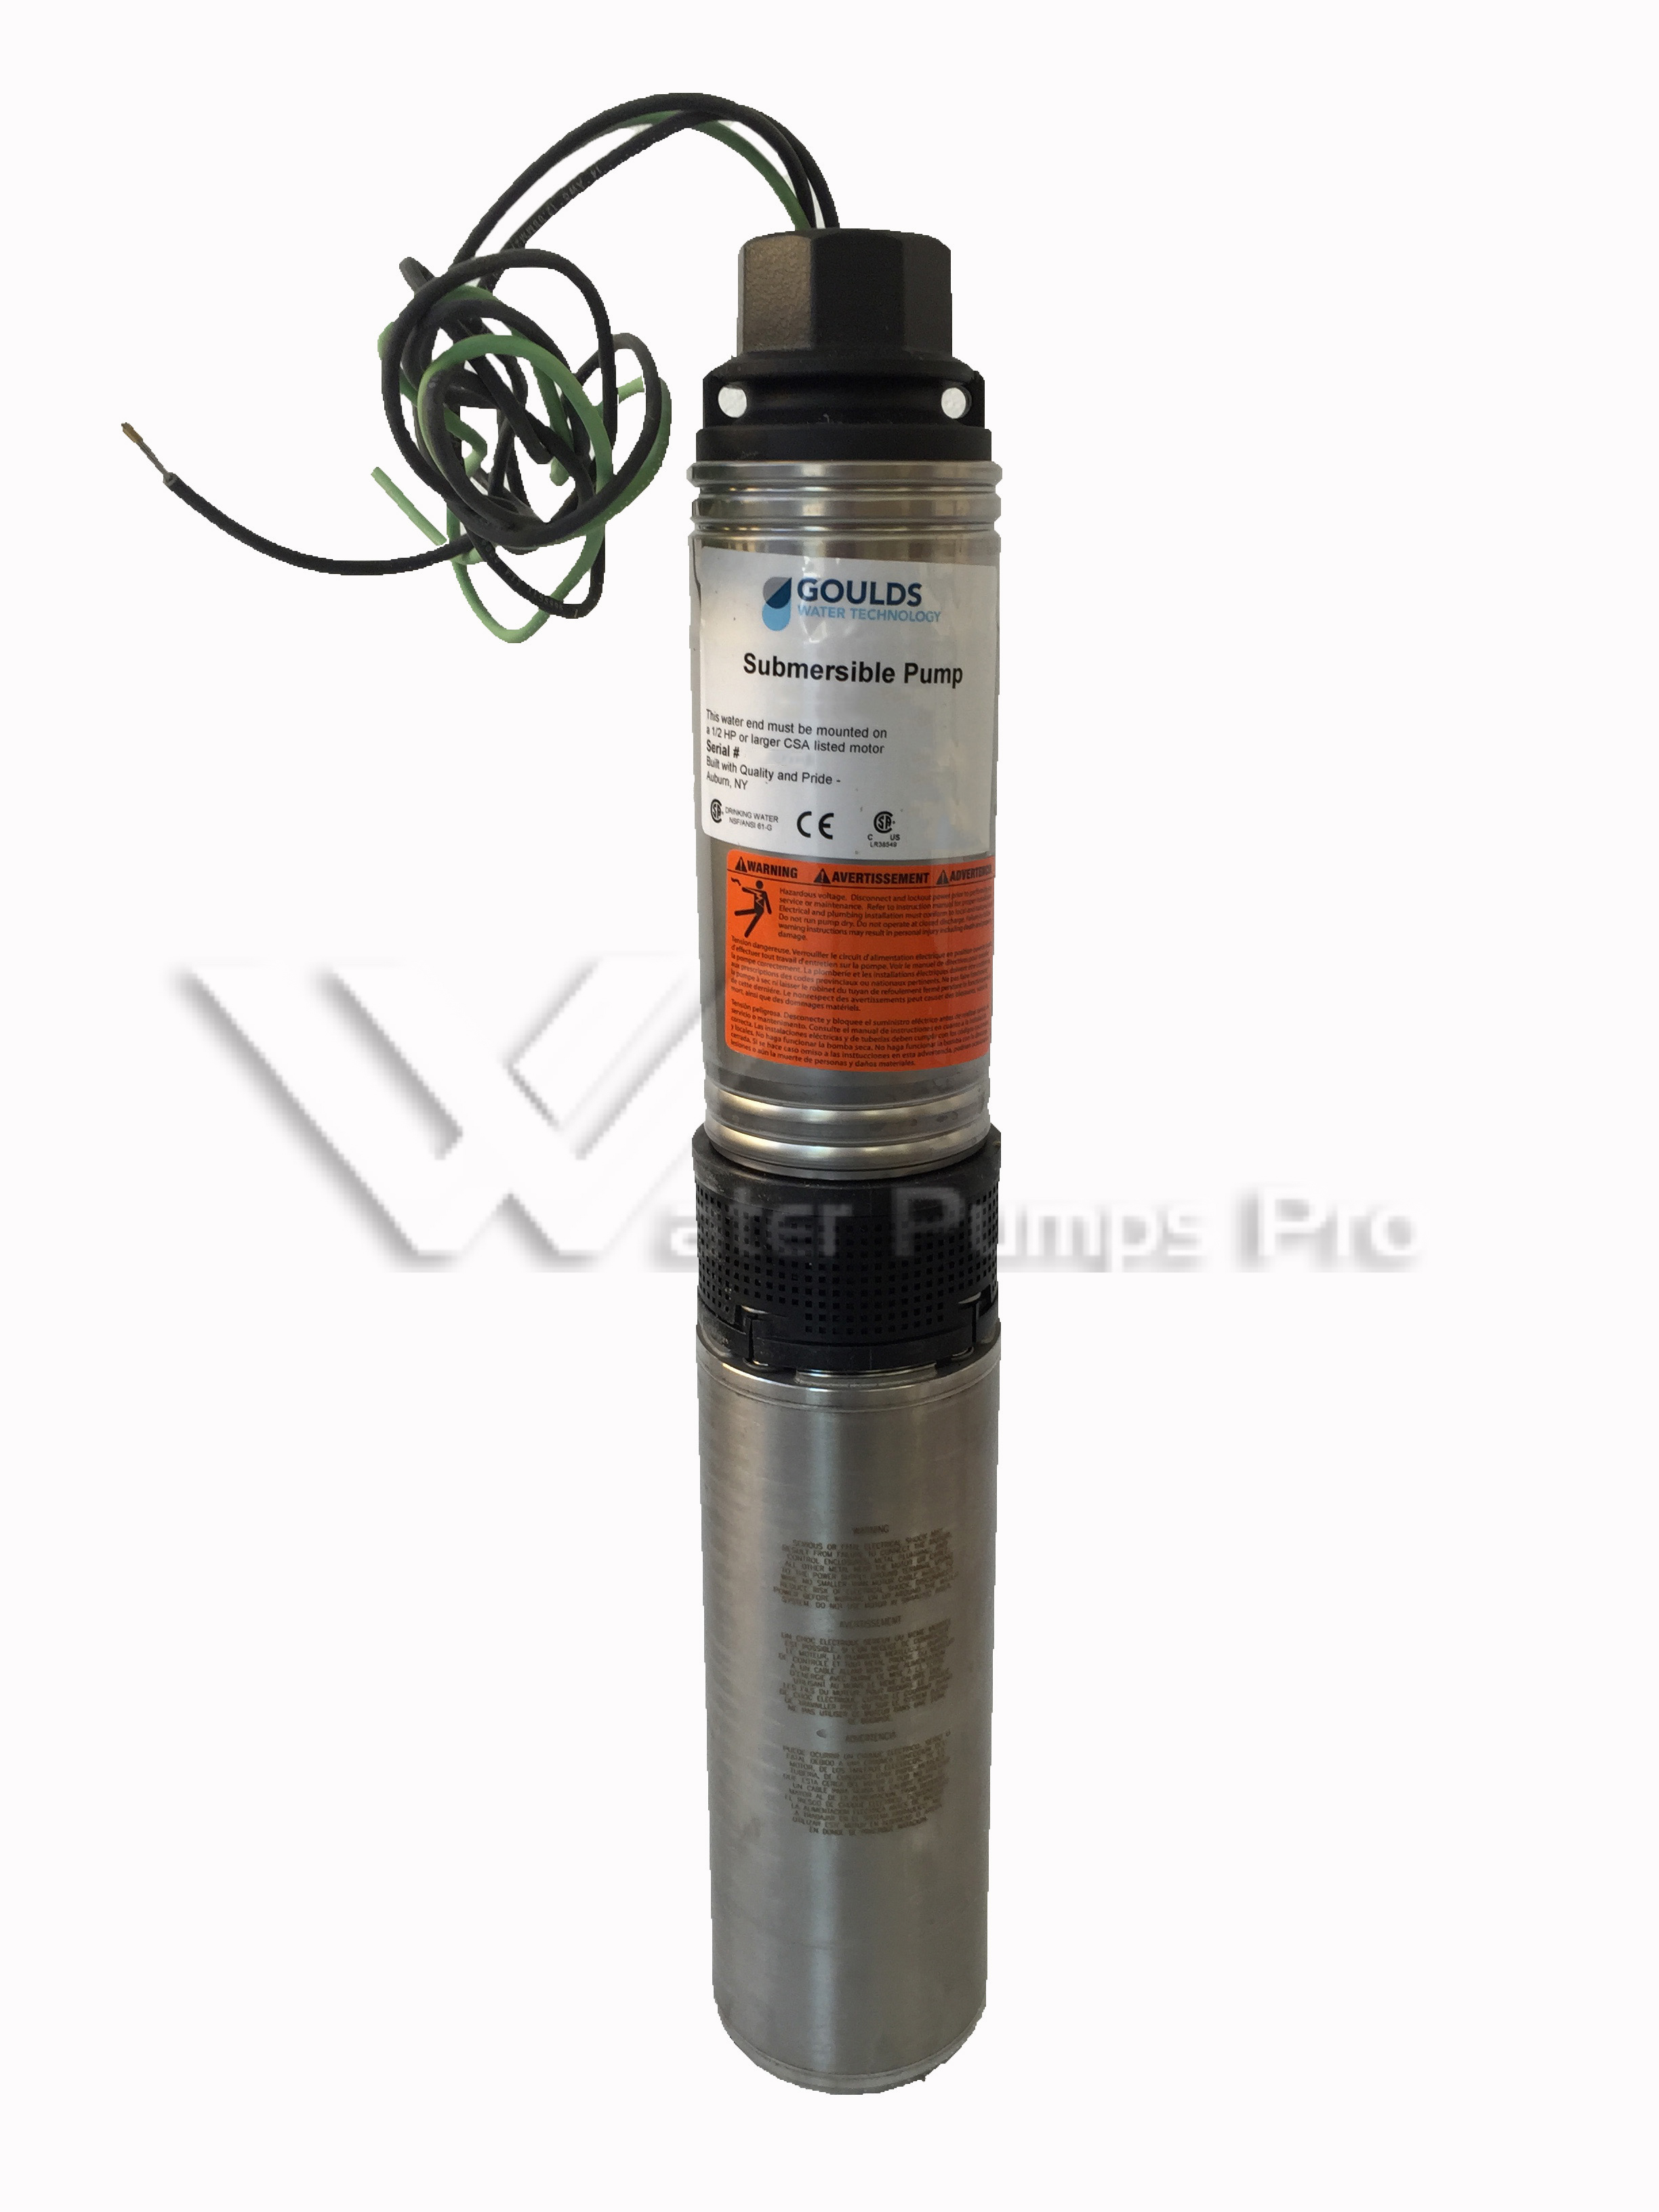 Goulds 5HS05421C Submersible Water Well Pump 1/2HP 115V 2Wire